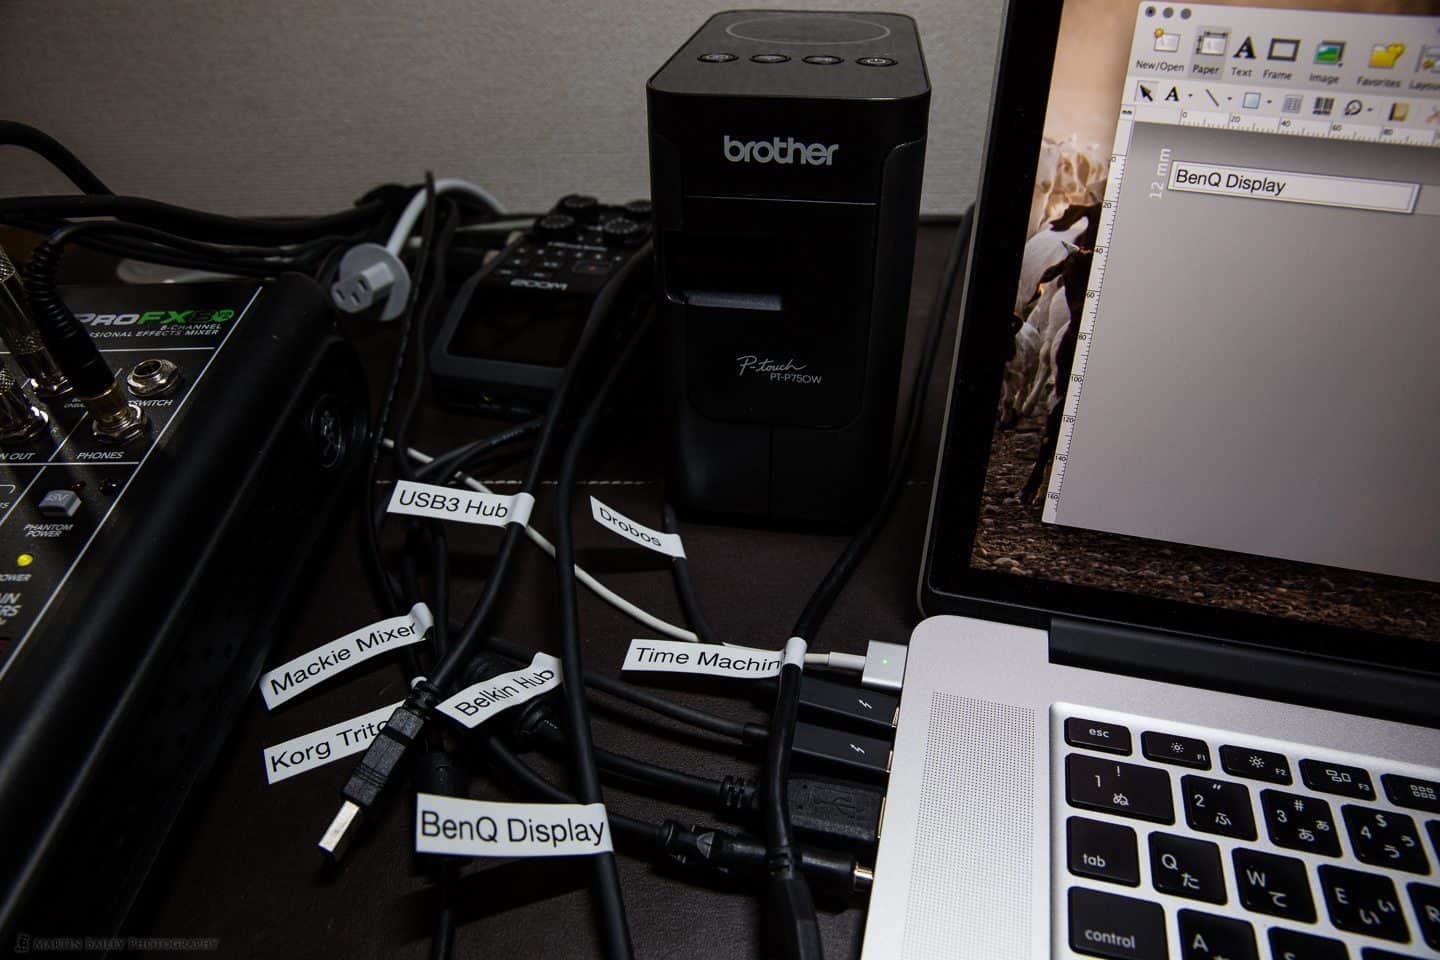 USB Cable Labels and Brother Label Printer